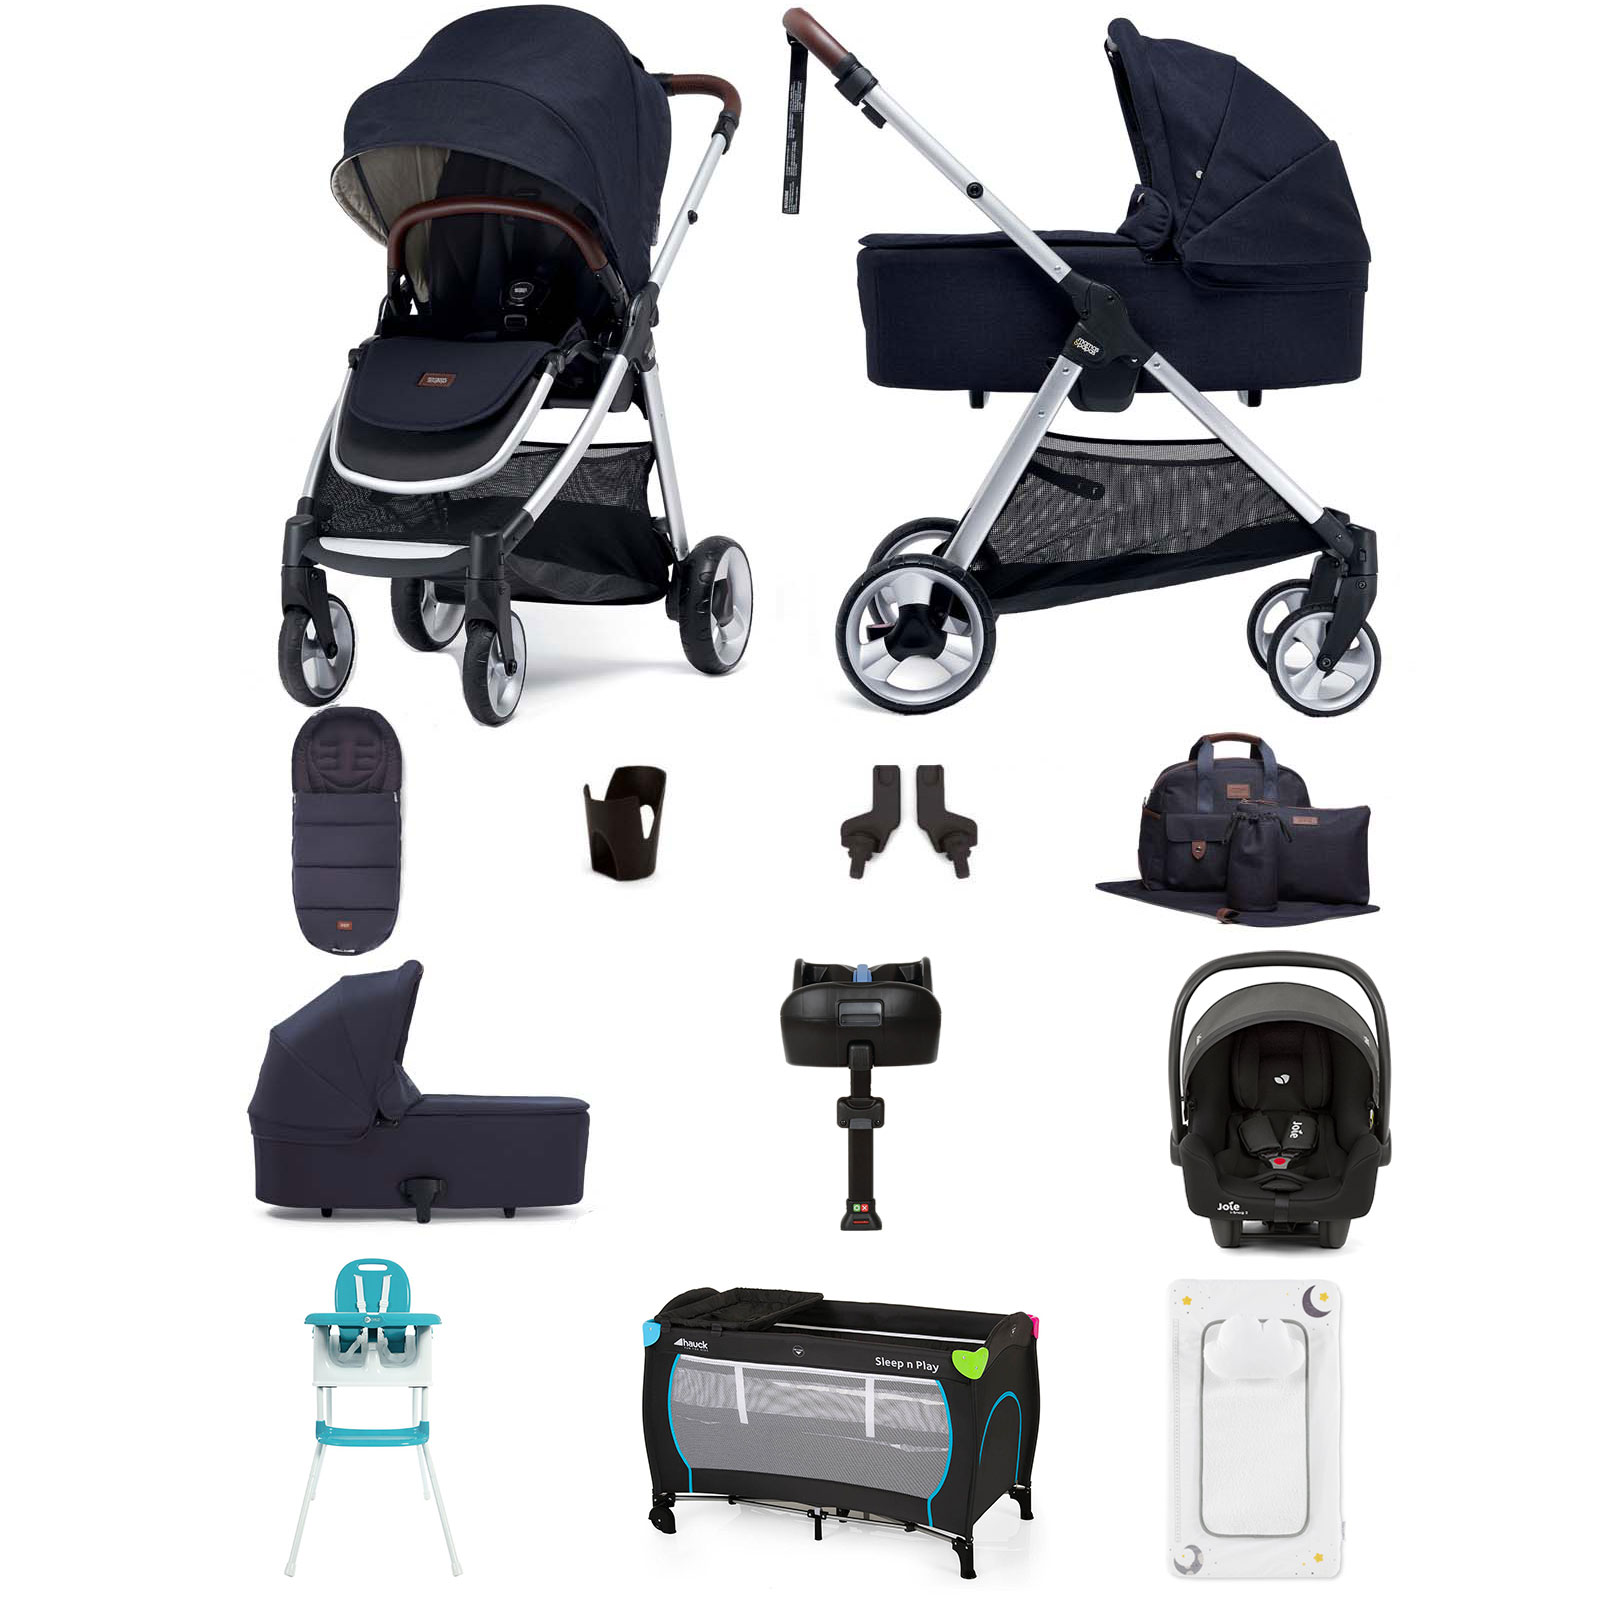 Mamas & Papas Flip XT2 12pc Essentials (Gemm Car Seat) Everything You Need Travel System Bundle with Carrycot & ISOFIX Base - Navy